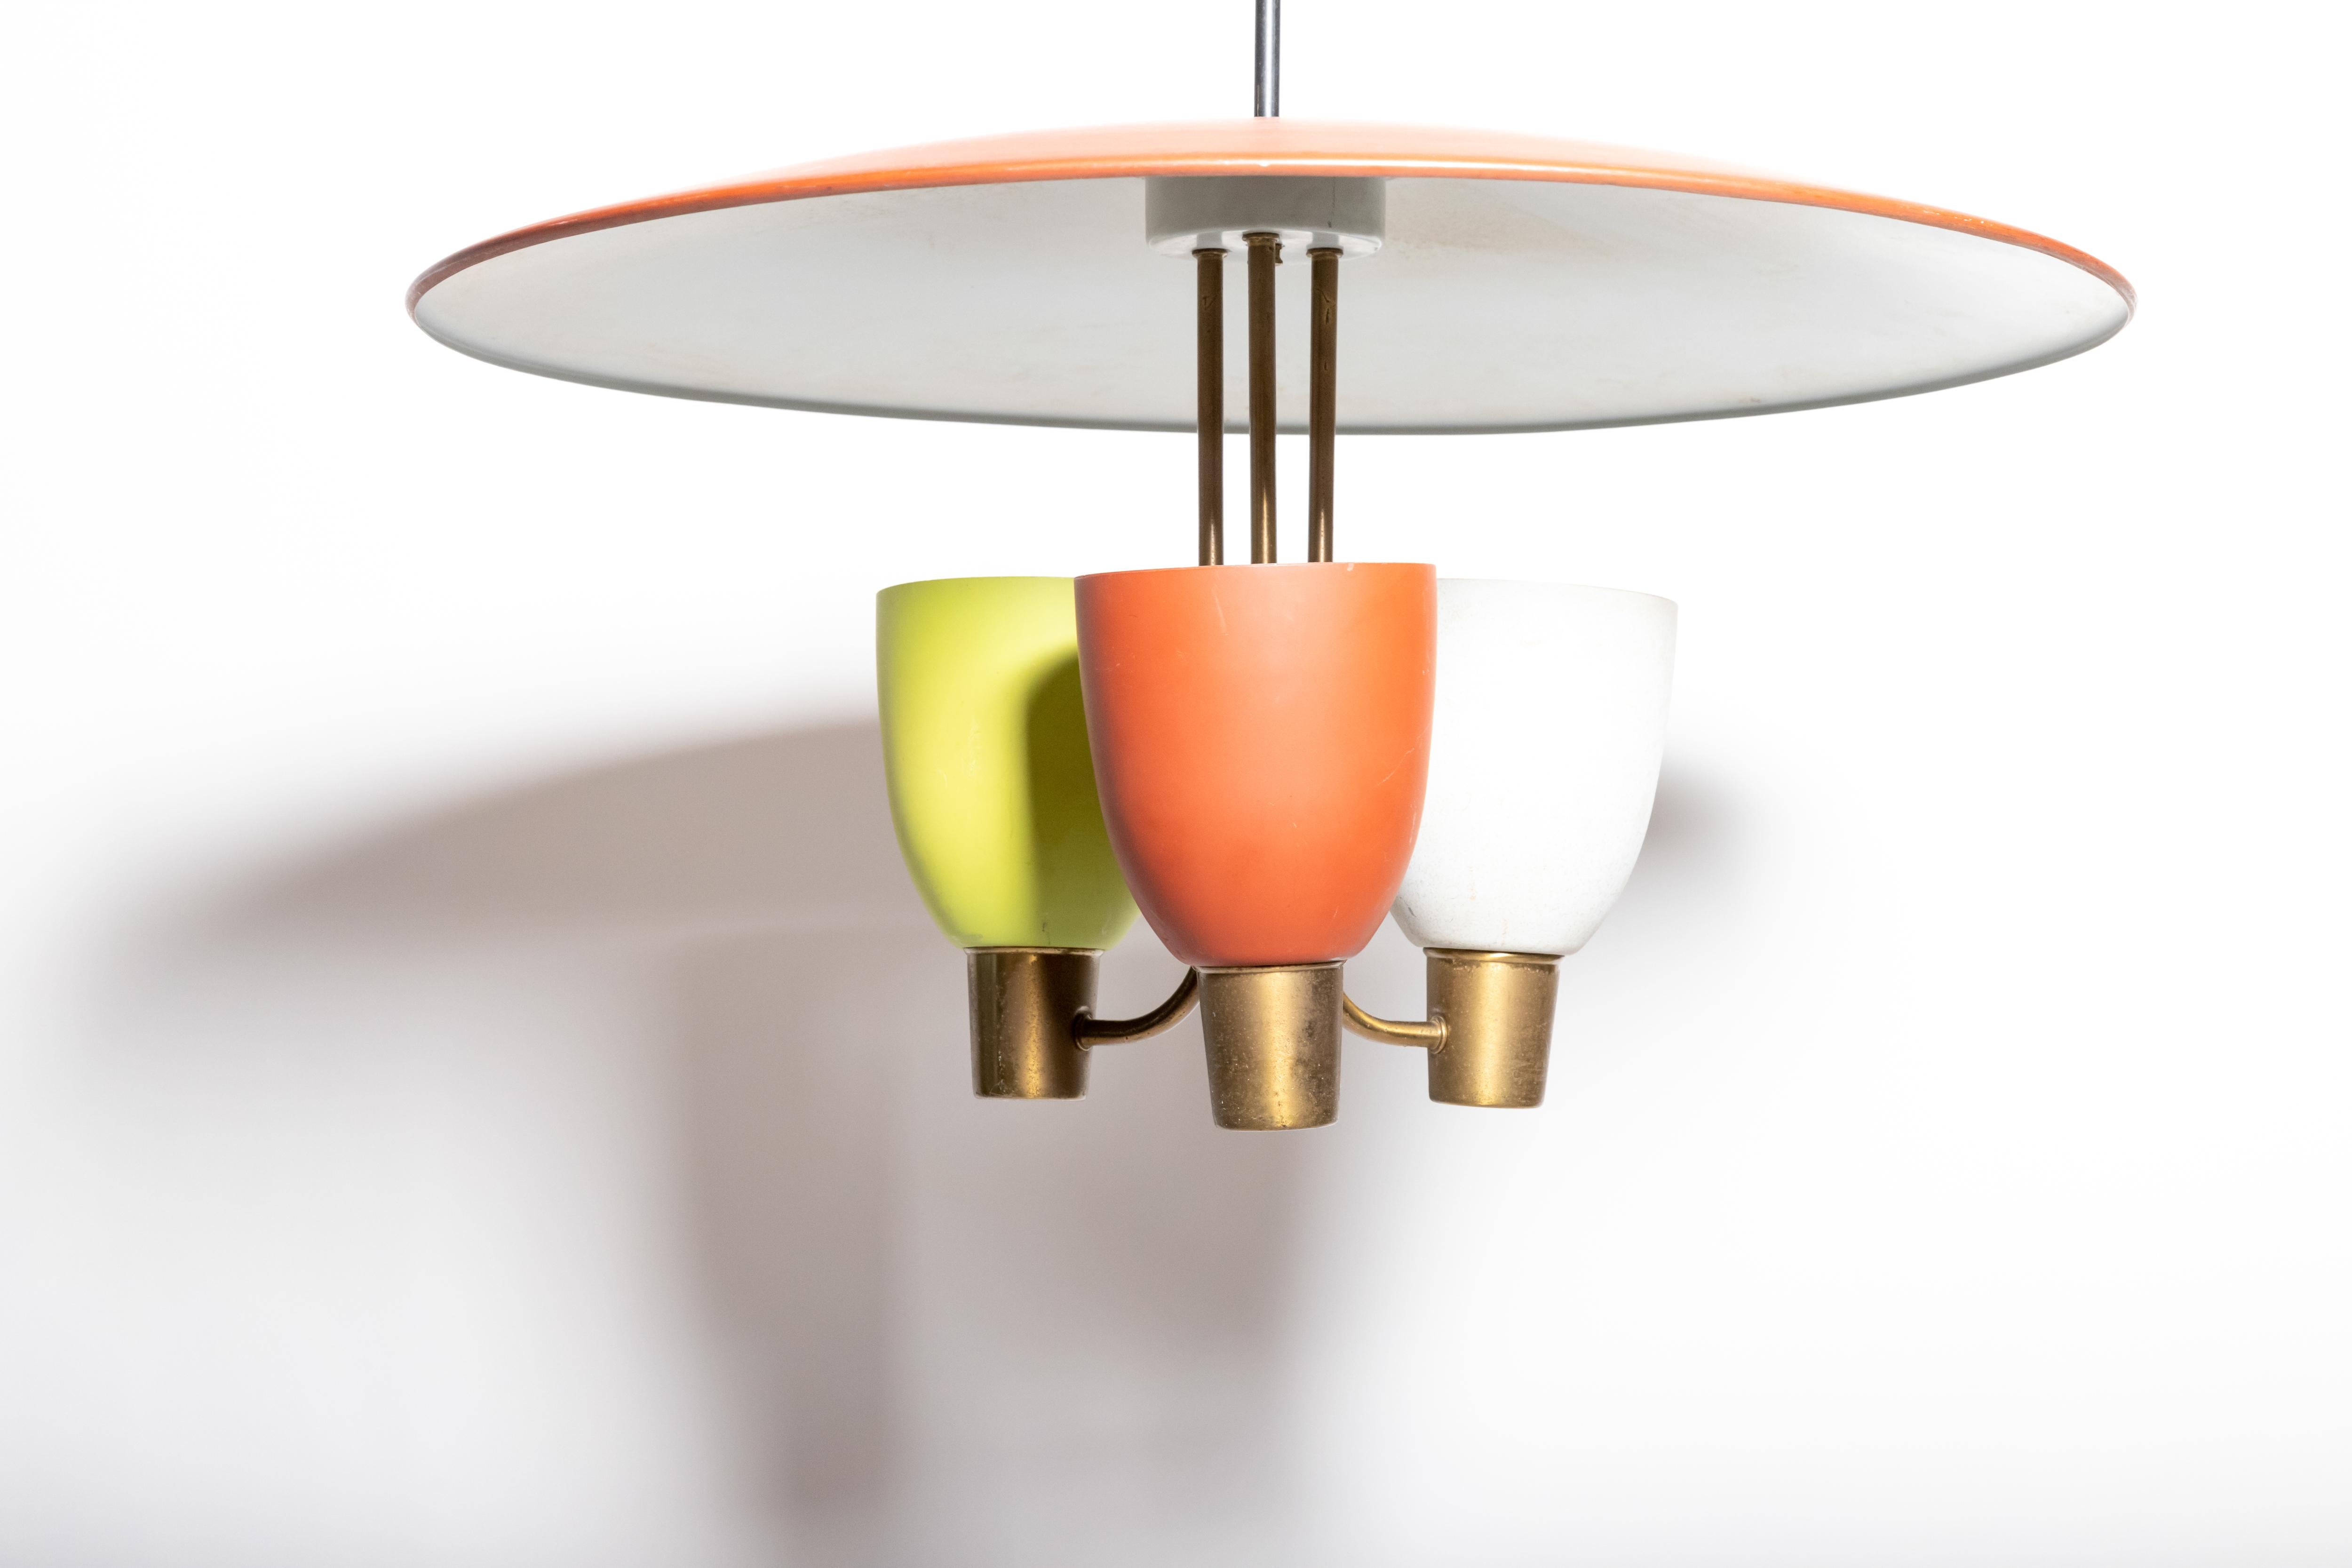 Metal Tricolor Ceiling Fixture with Three Lights, c. 1950s